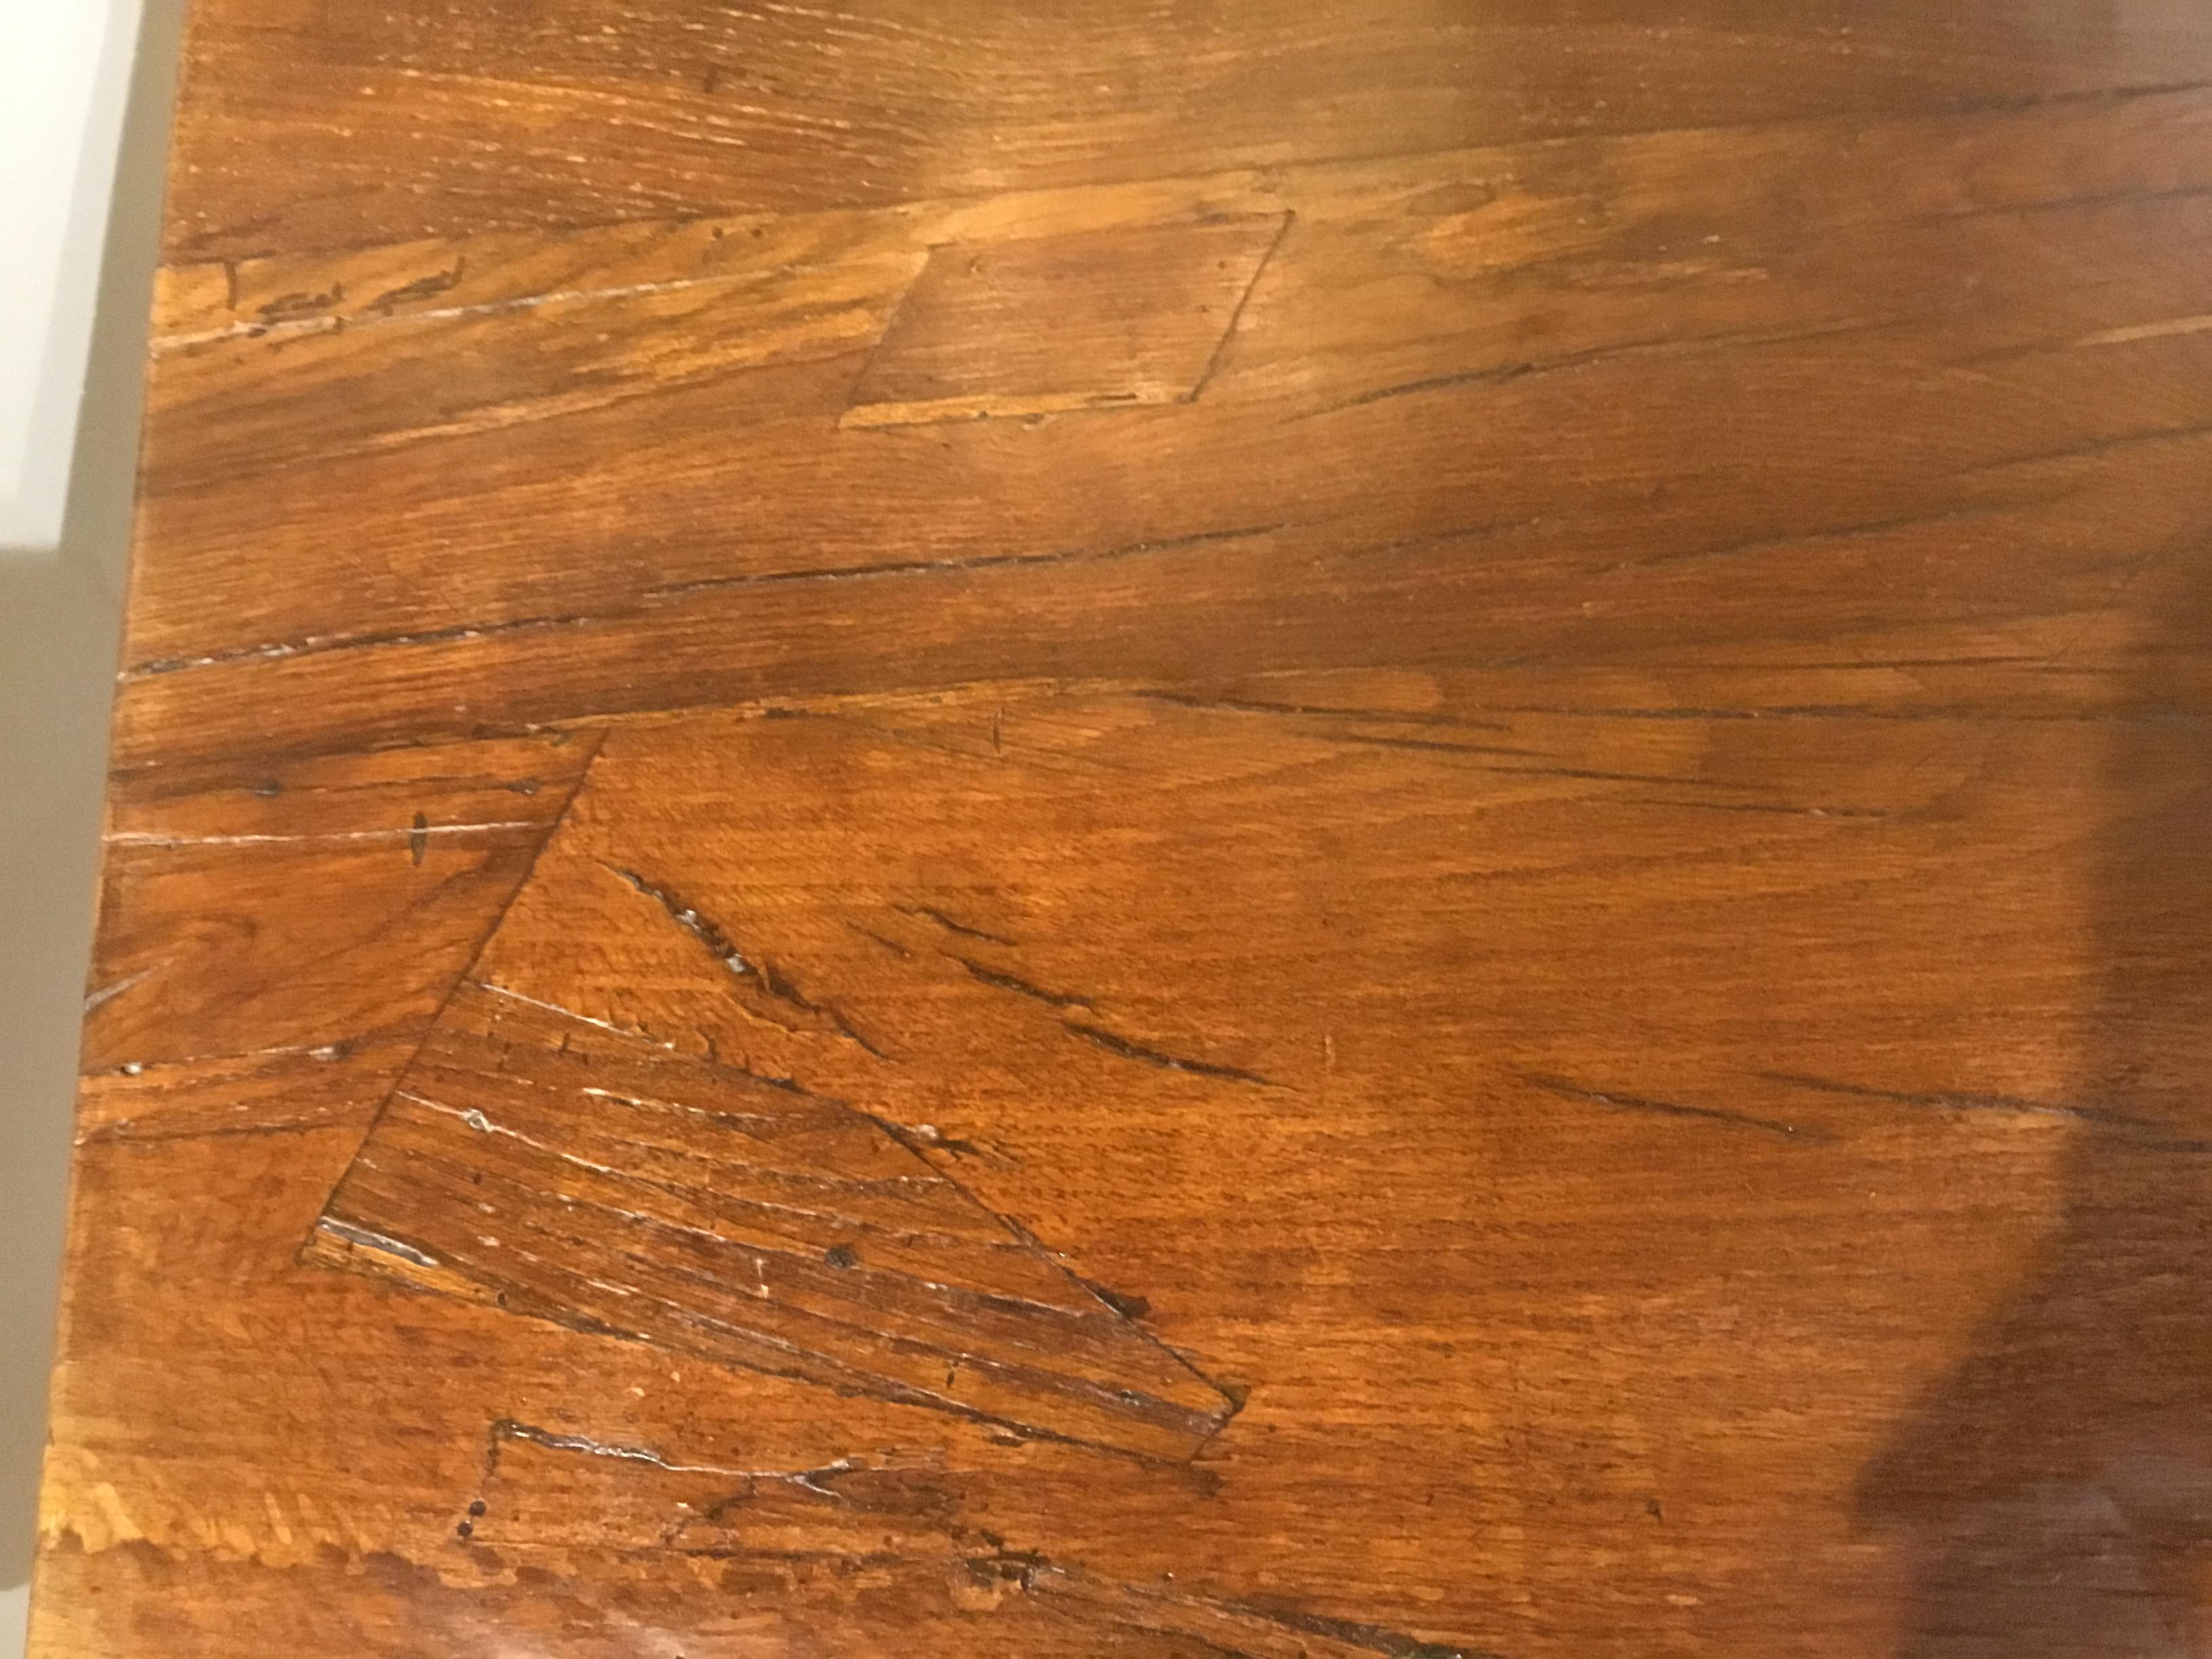 Rustic Spanish Refectory Table Early 19th Century with Ox Bow Carved Ends Walnut In Good Condition For Sale In Houston, TX